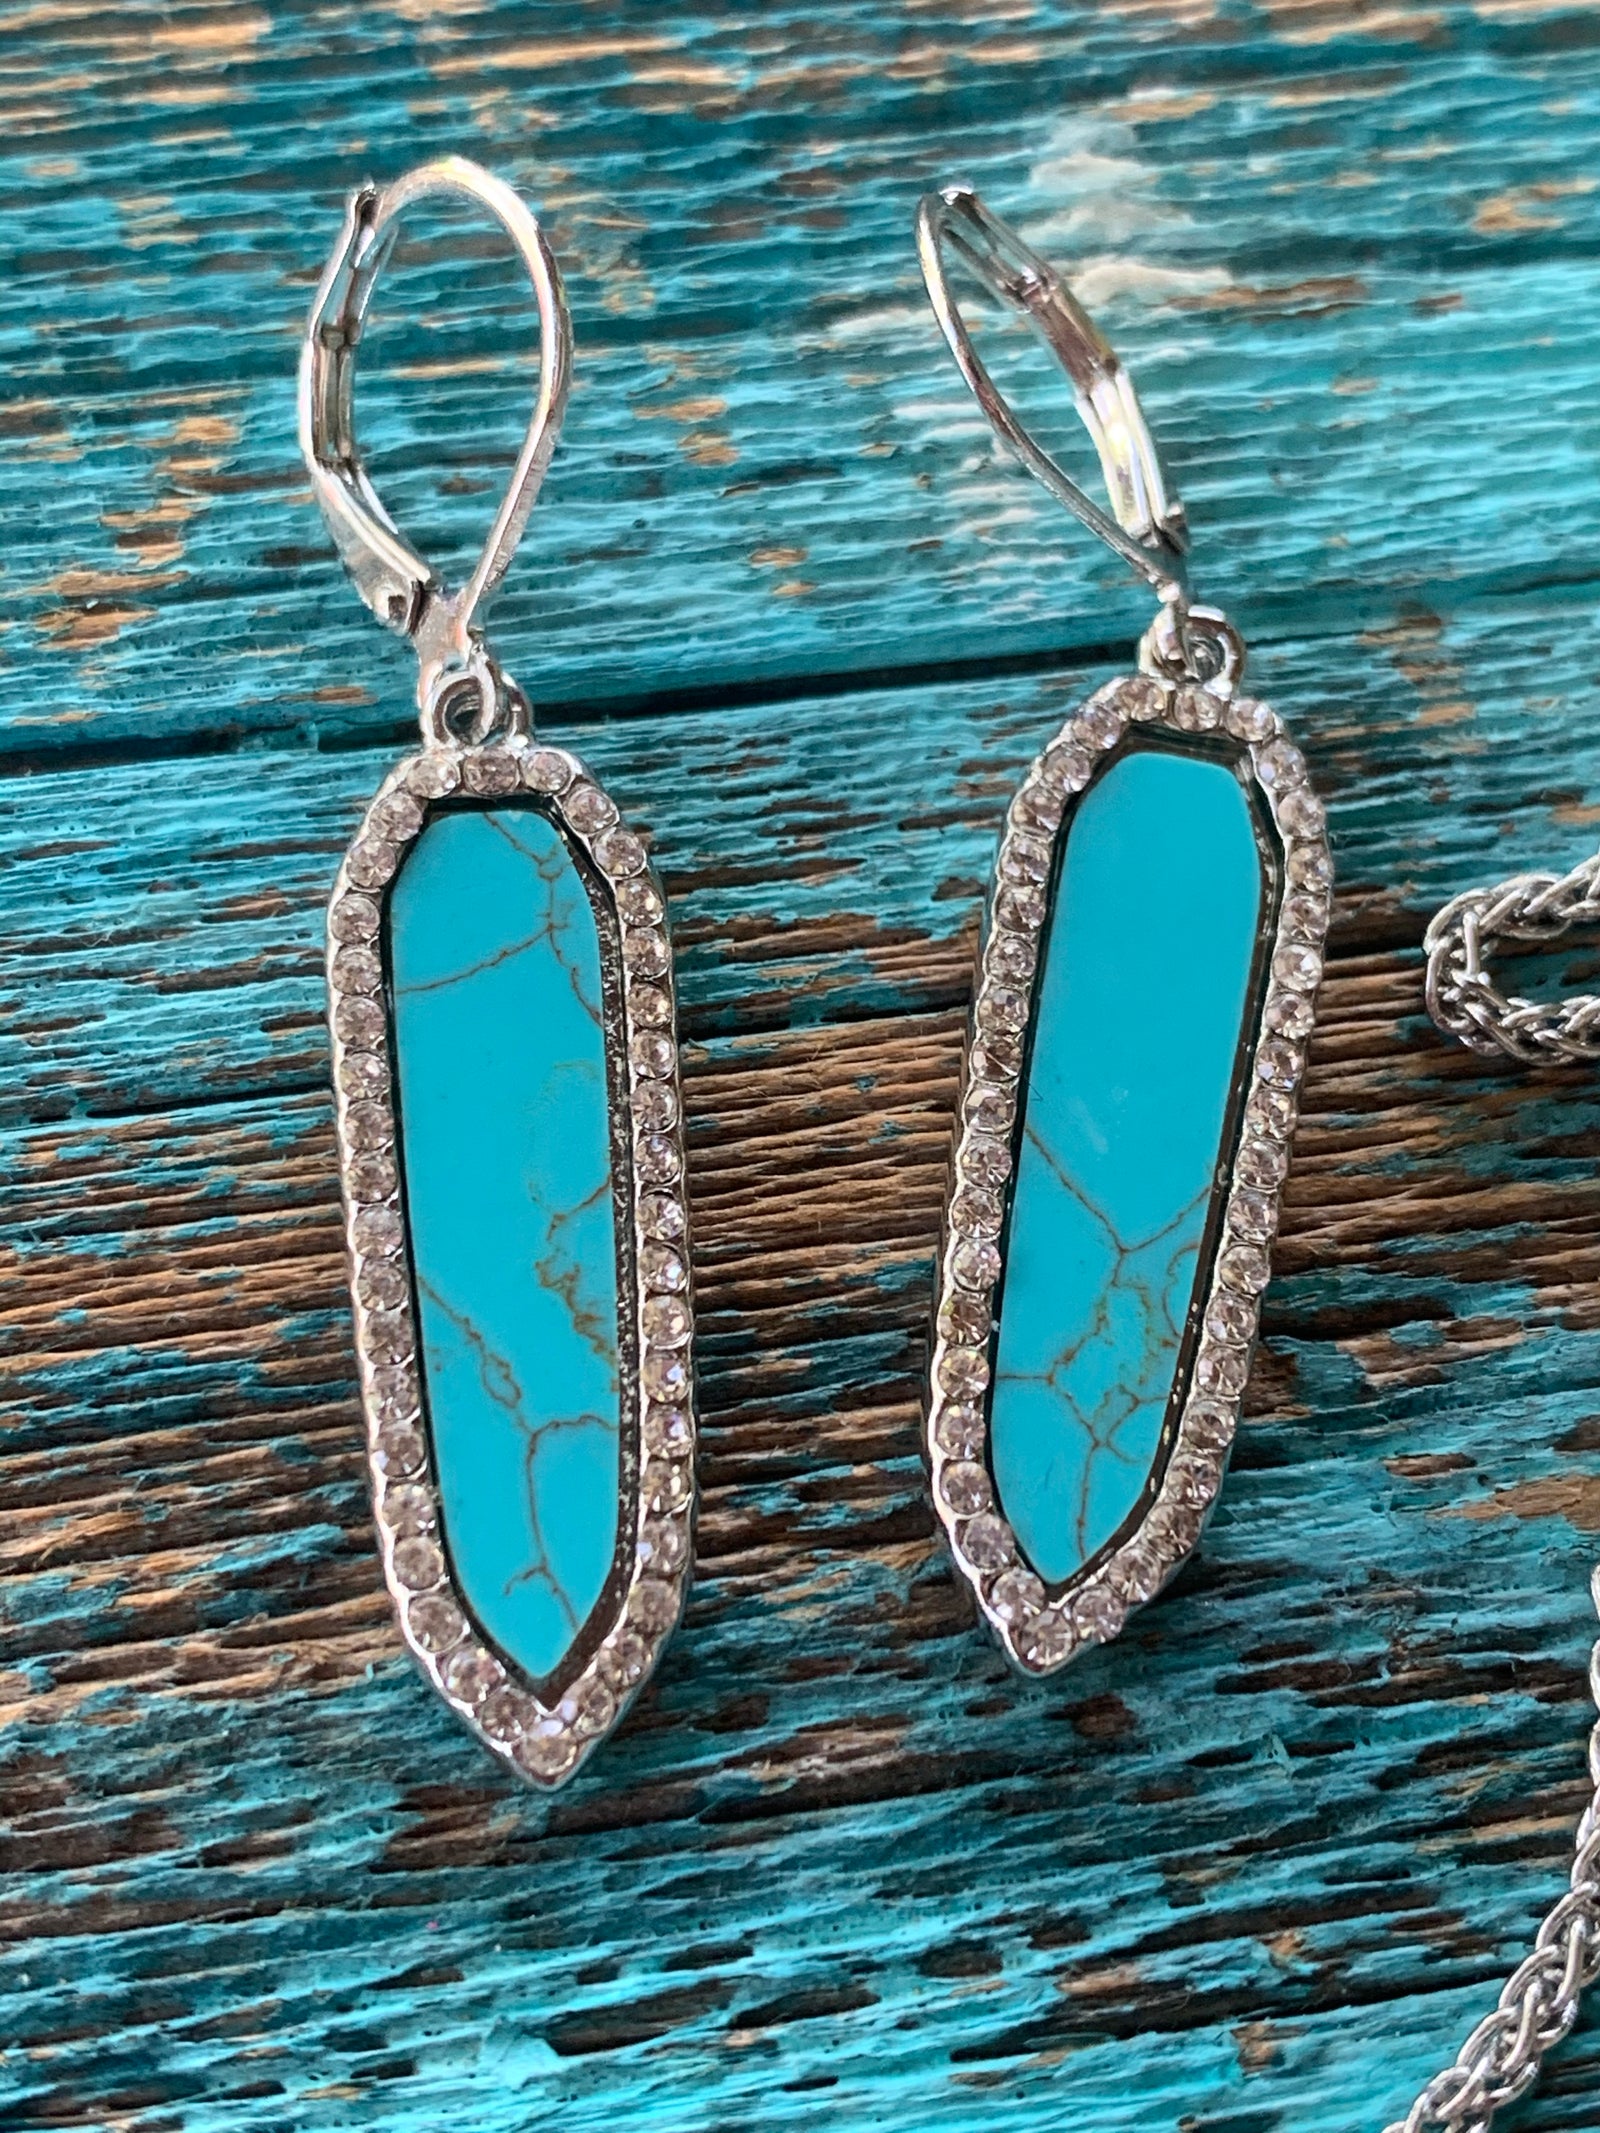 Silver Chain And Turquoise Stone Necklace Set